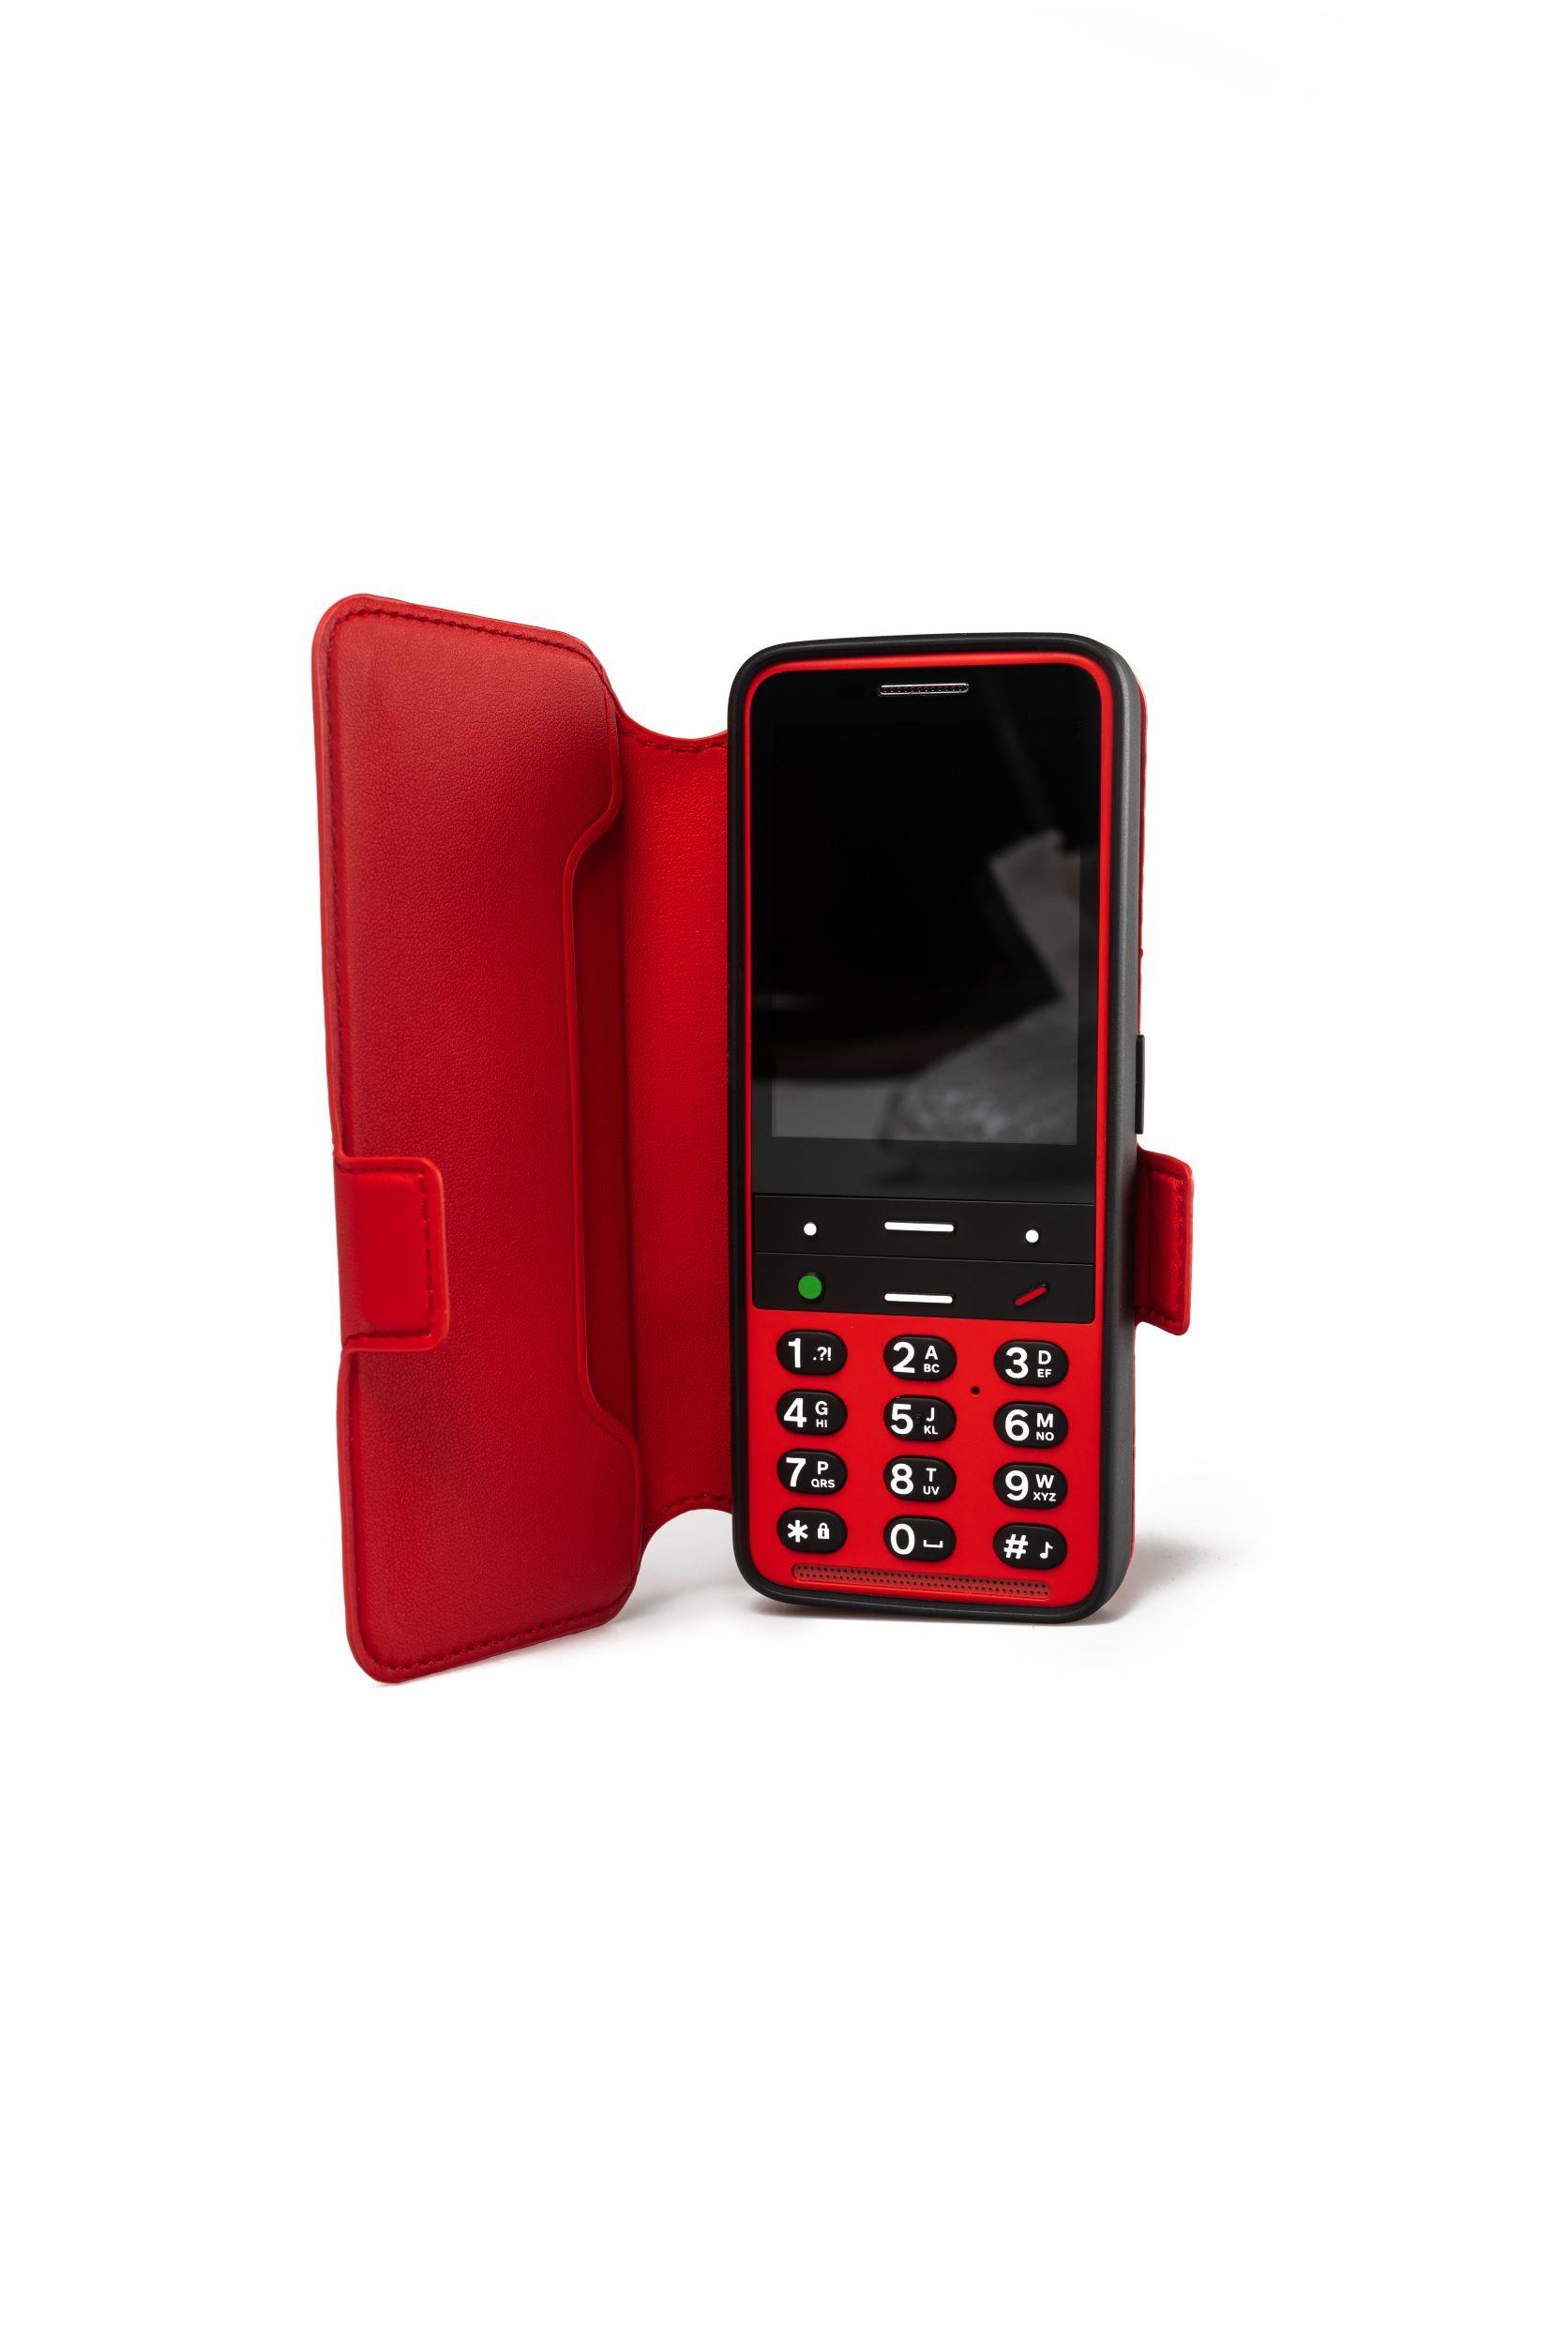 Red blindshell classic 2 phone with its flip case open